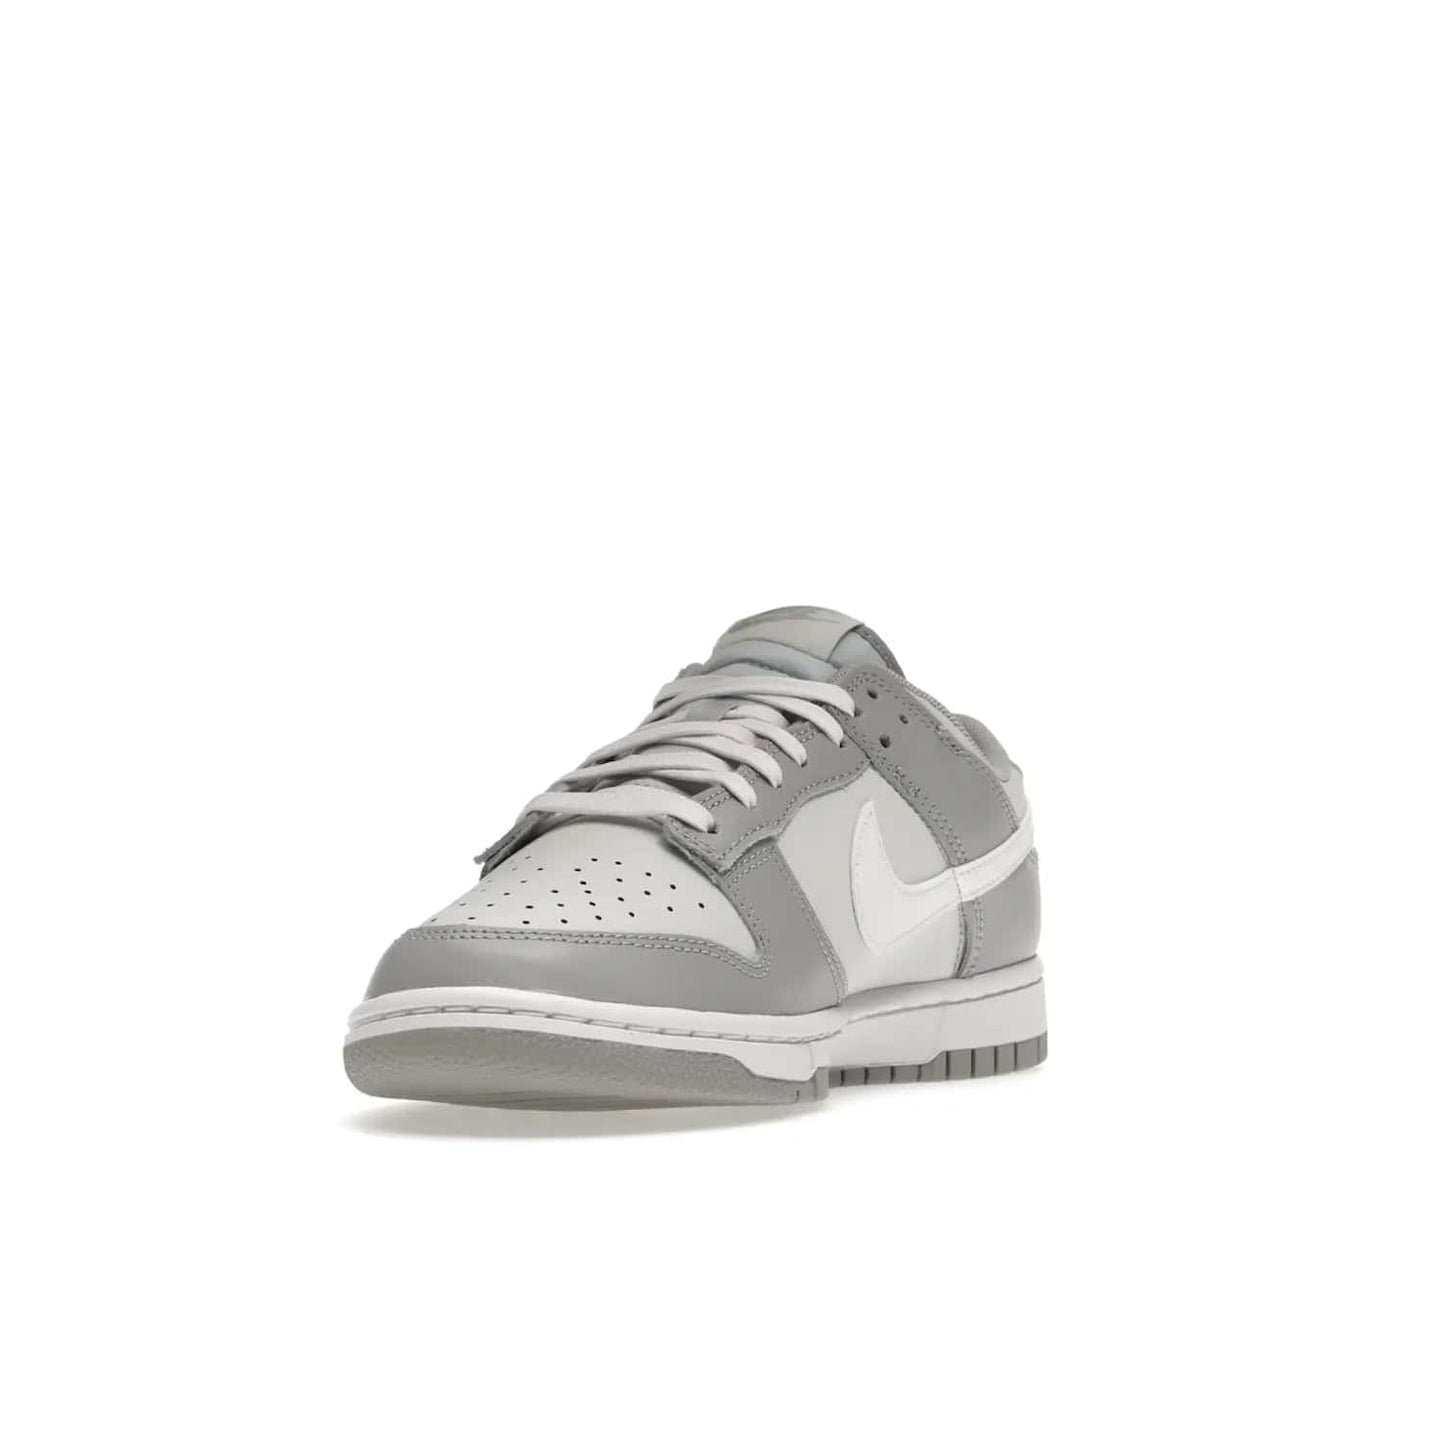 Nike Dunk Low Two Tone Grey - Image 13 - Only at www.BallersClubKickz.com - Fresh Nike Dunk Low Two Tone Grey leather/overlay Sneaker. White Swoosh detailing, nylon tongue, woven label and Air Sole. Get yours and stay on the trend.